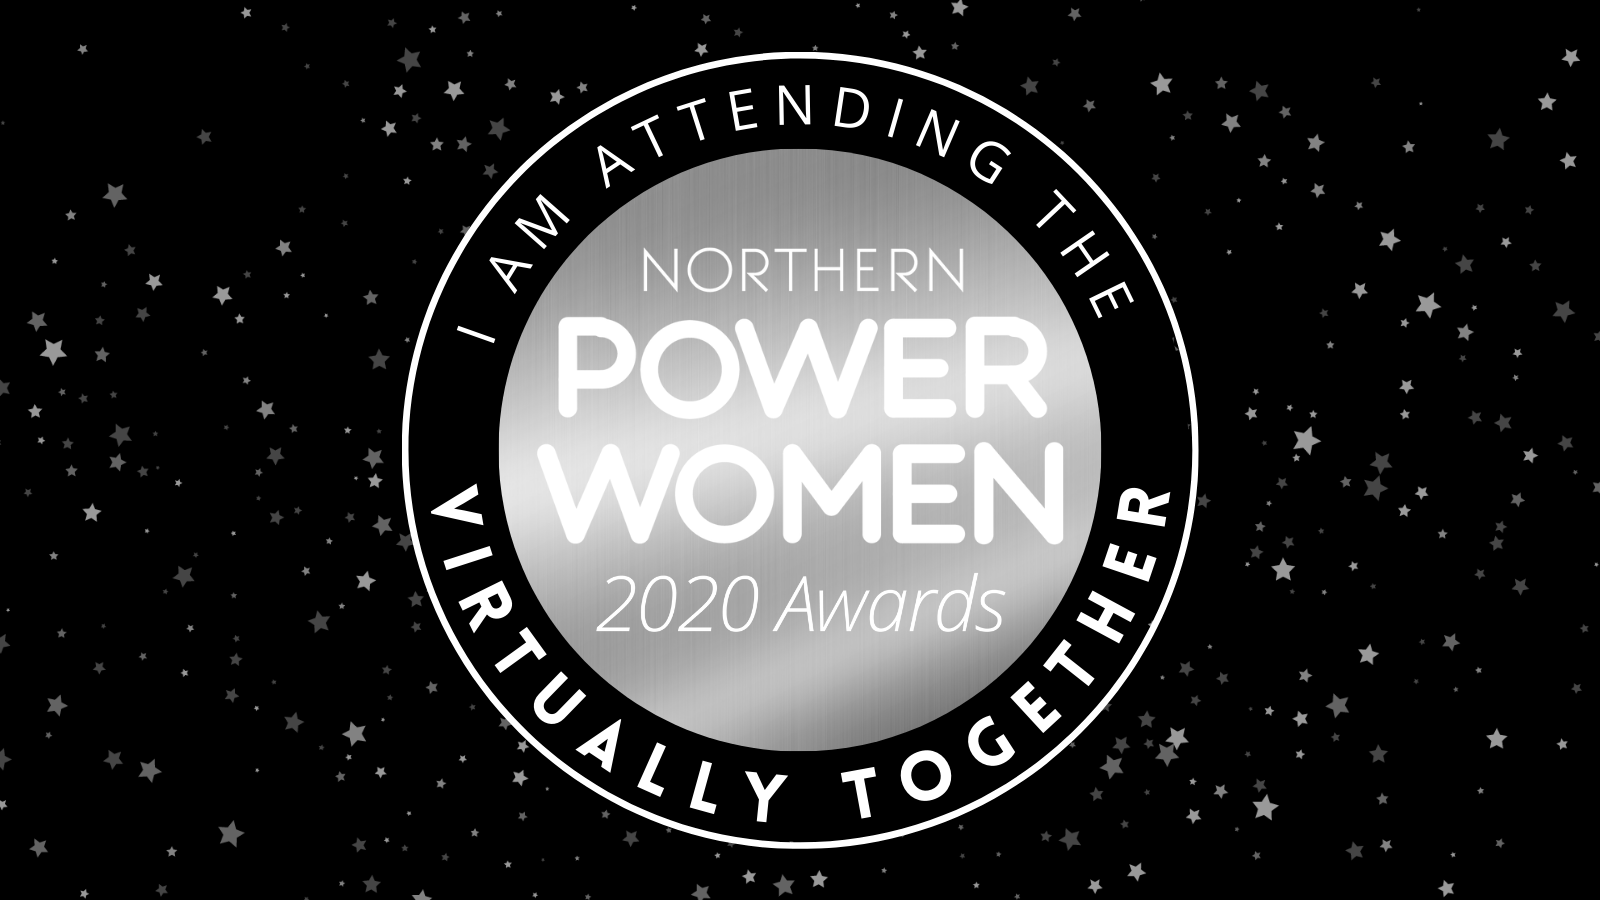 Northern Power Women celebrate their annual awards ceremony